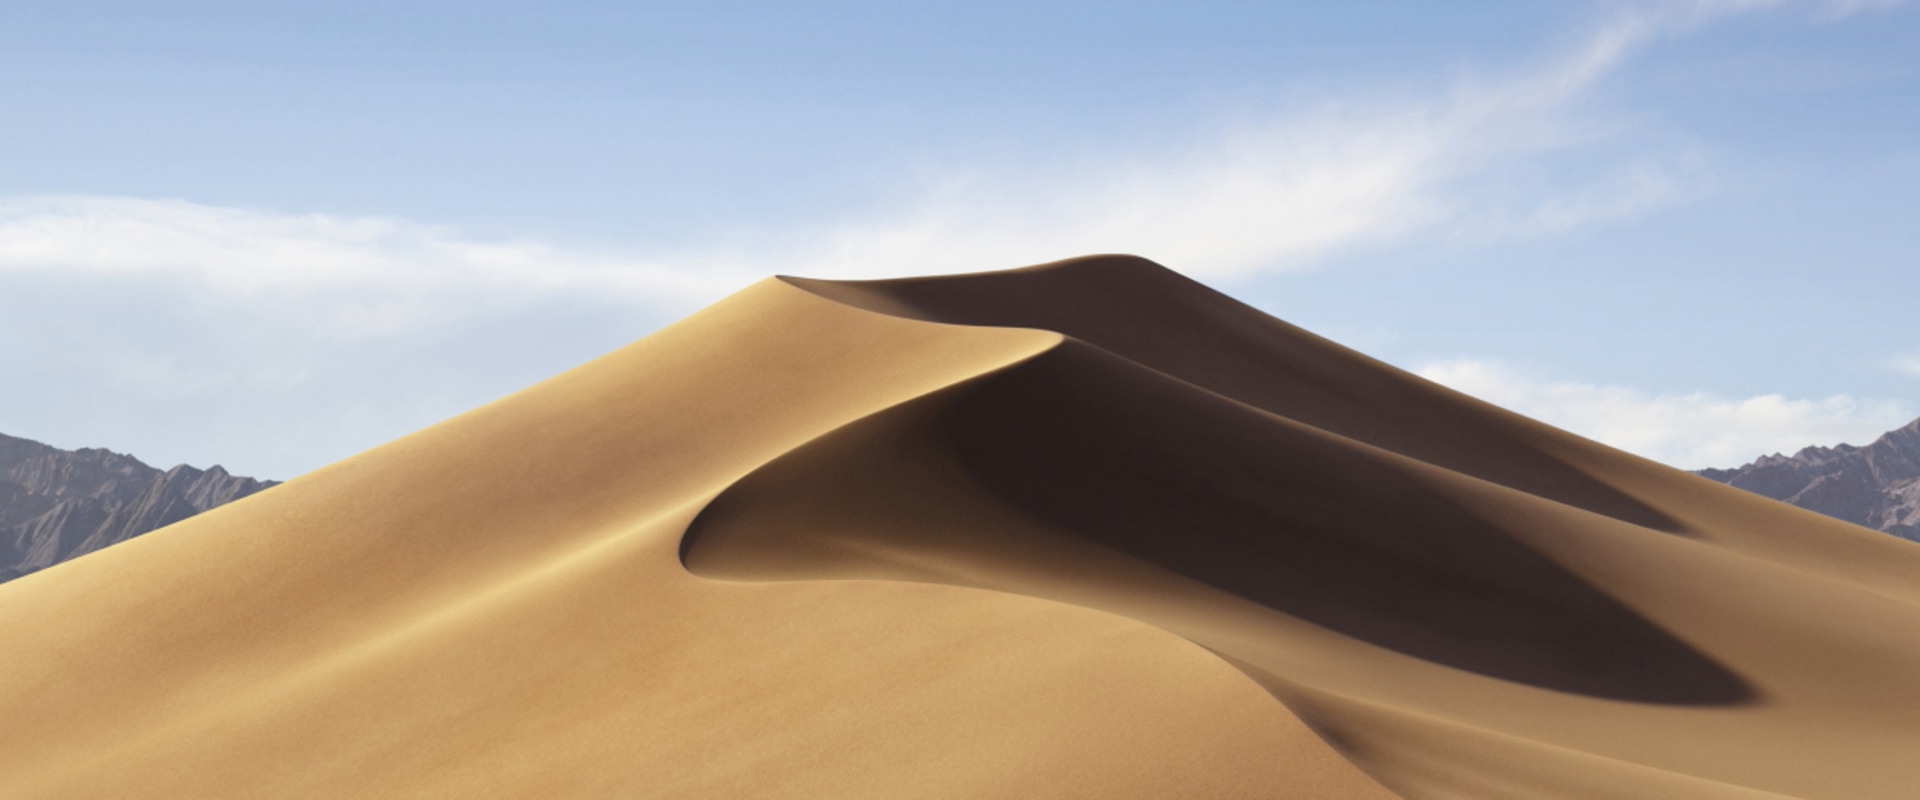 What You Need to Know About macOS Mojave